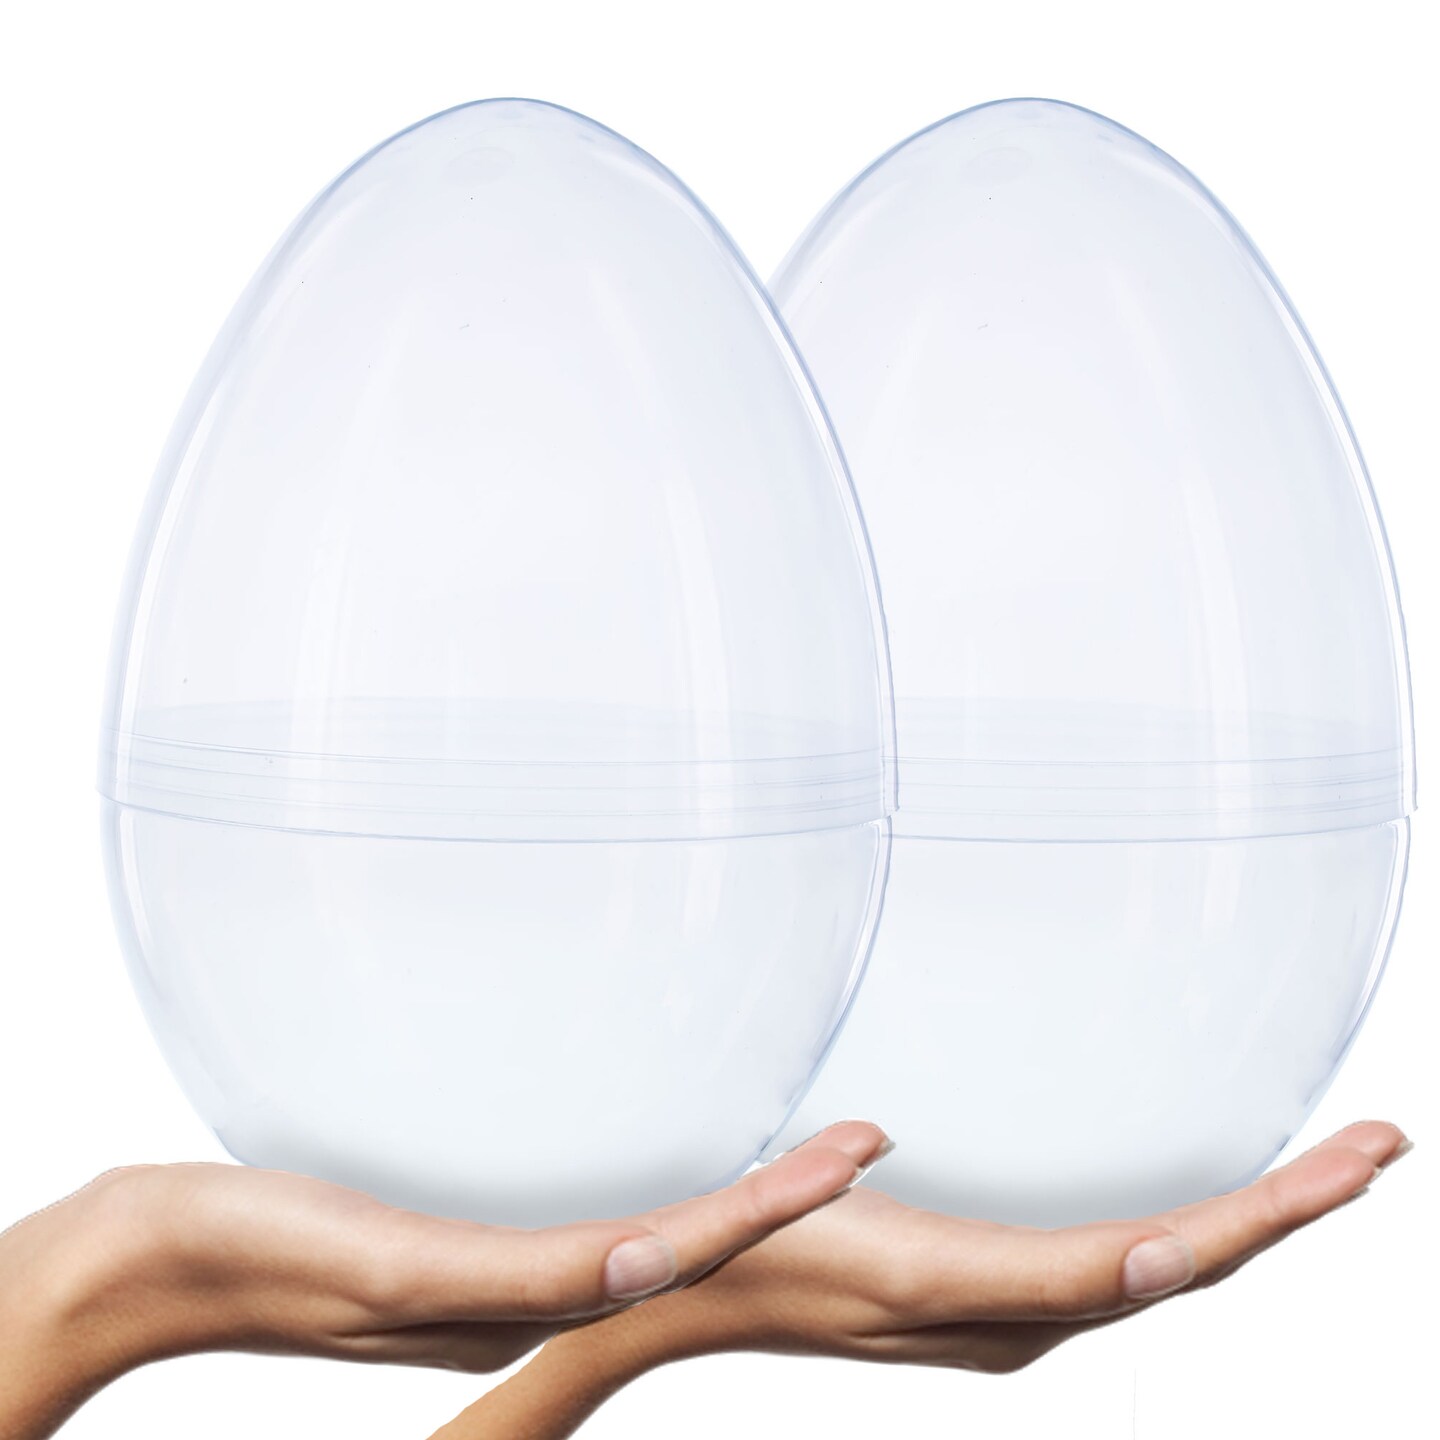 Set of 2 Giant Transparent Jumbo Size Clear Plastic Easter Eggs 10 Inches